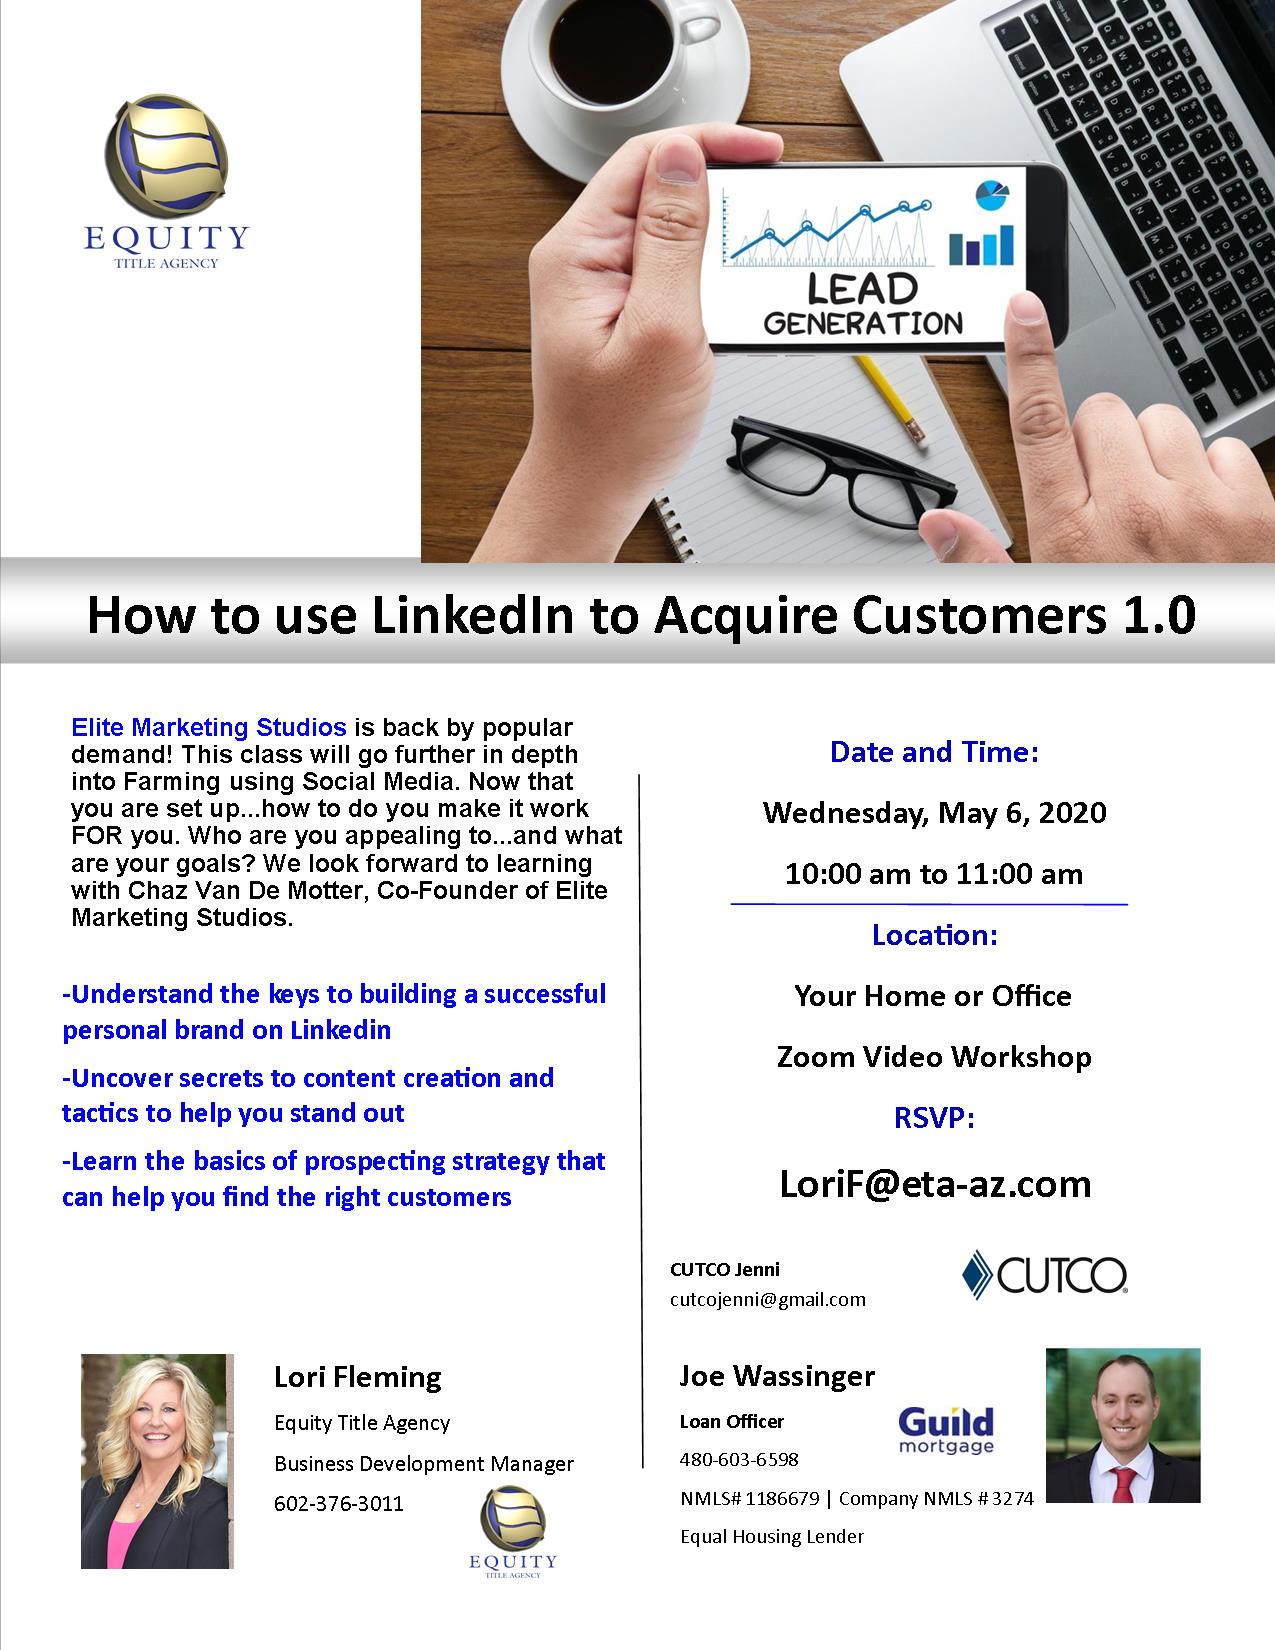 LinkedIn to Acquire Customers 1.0